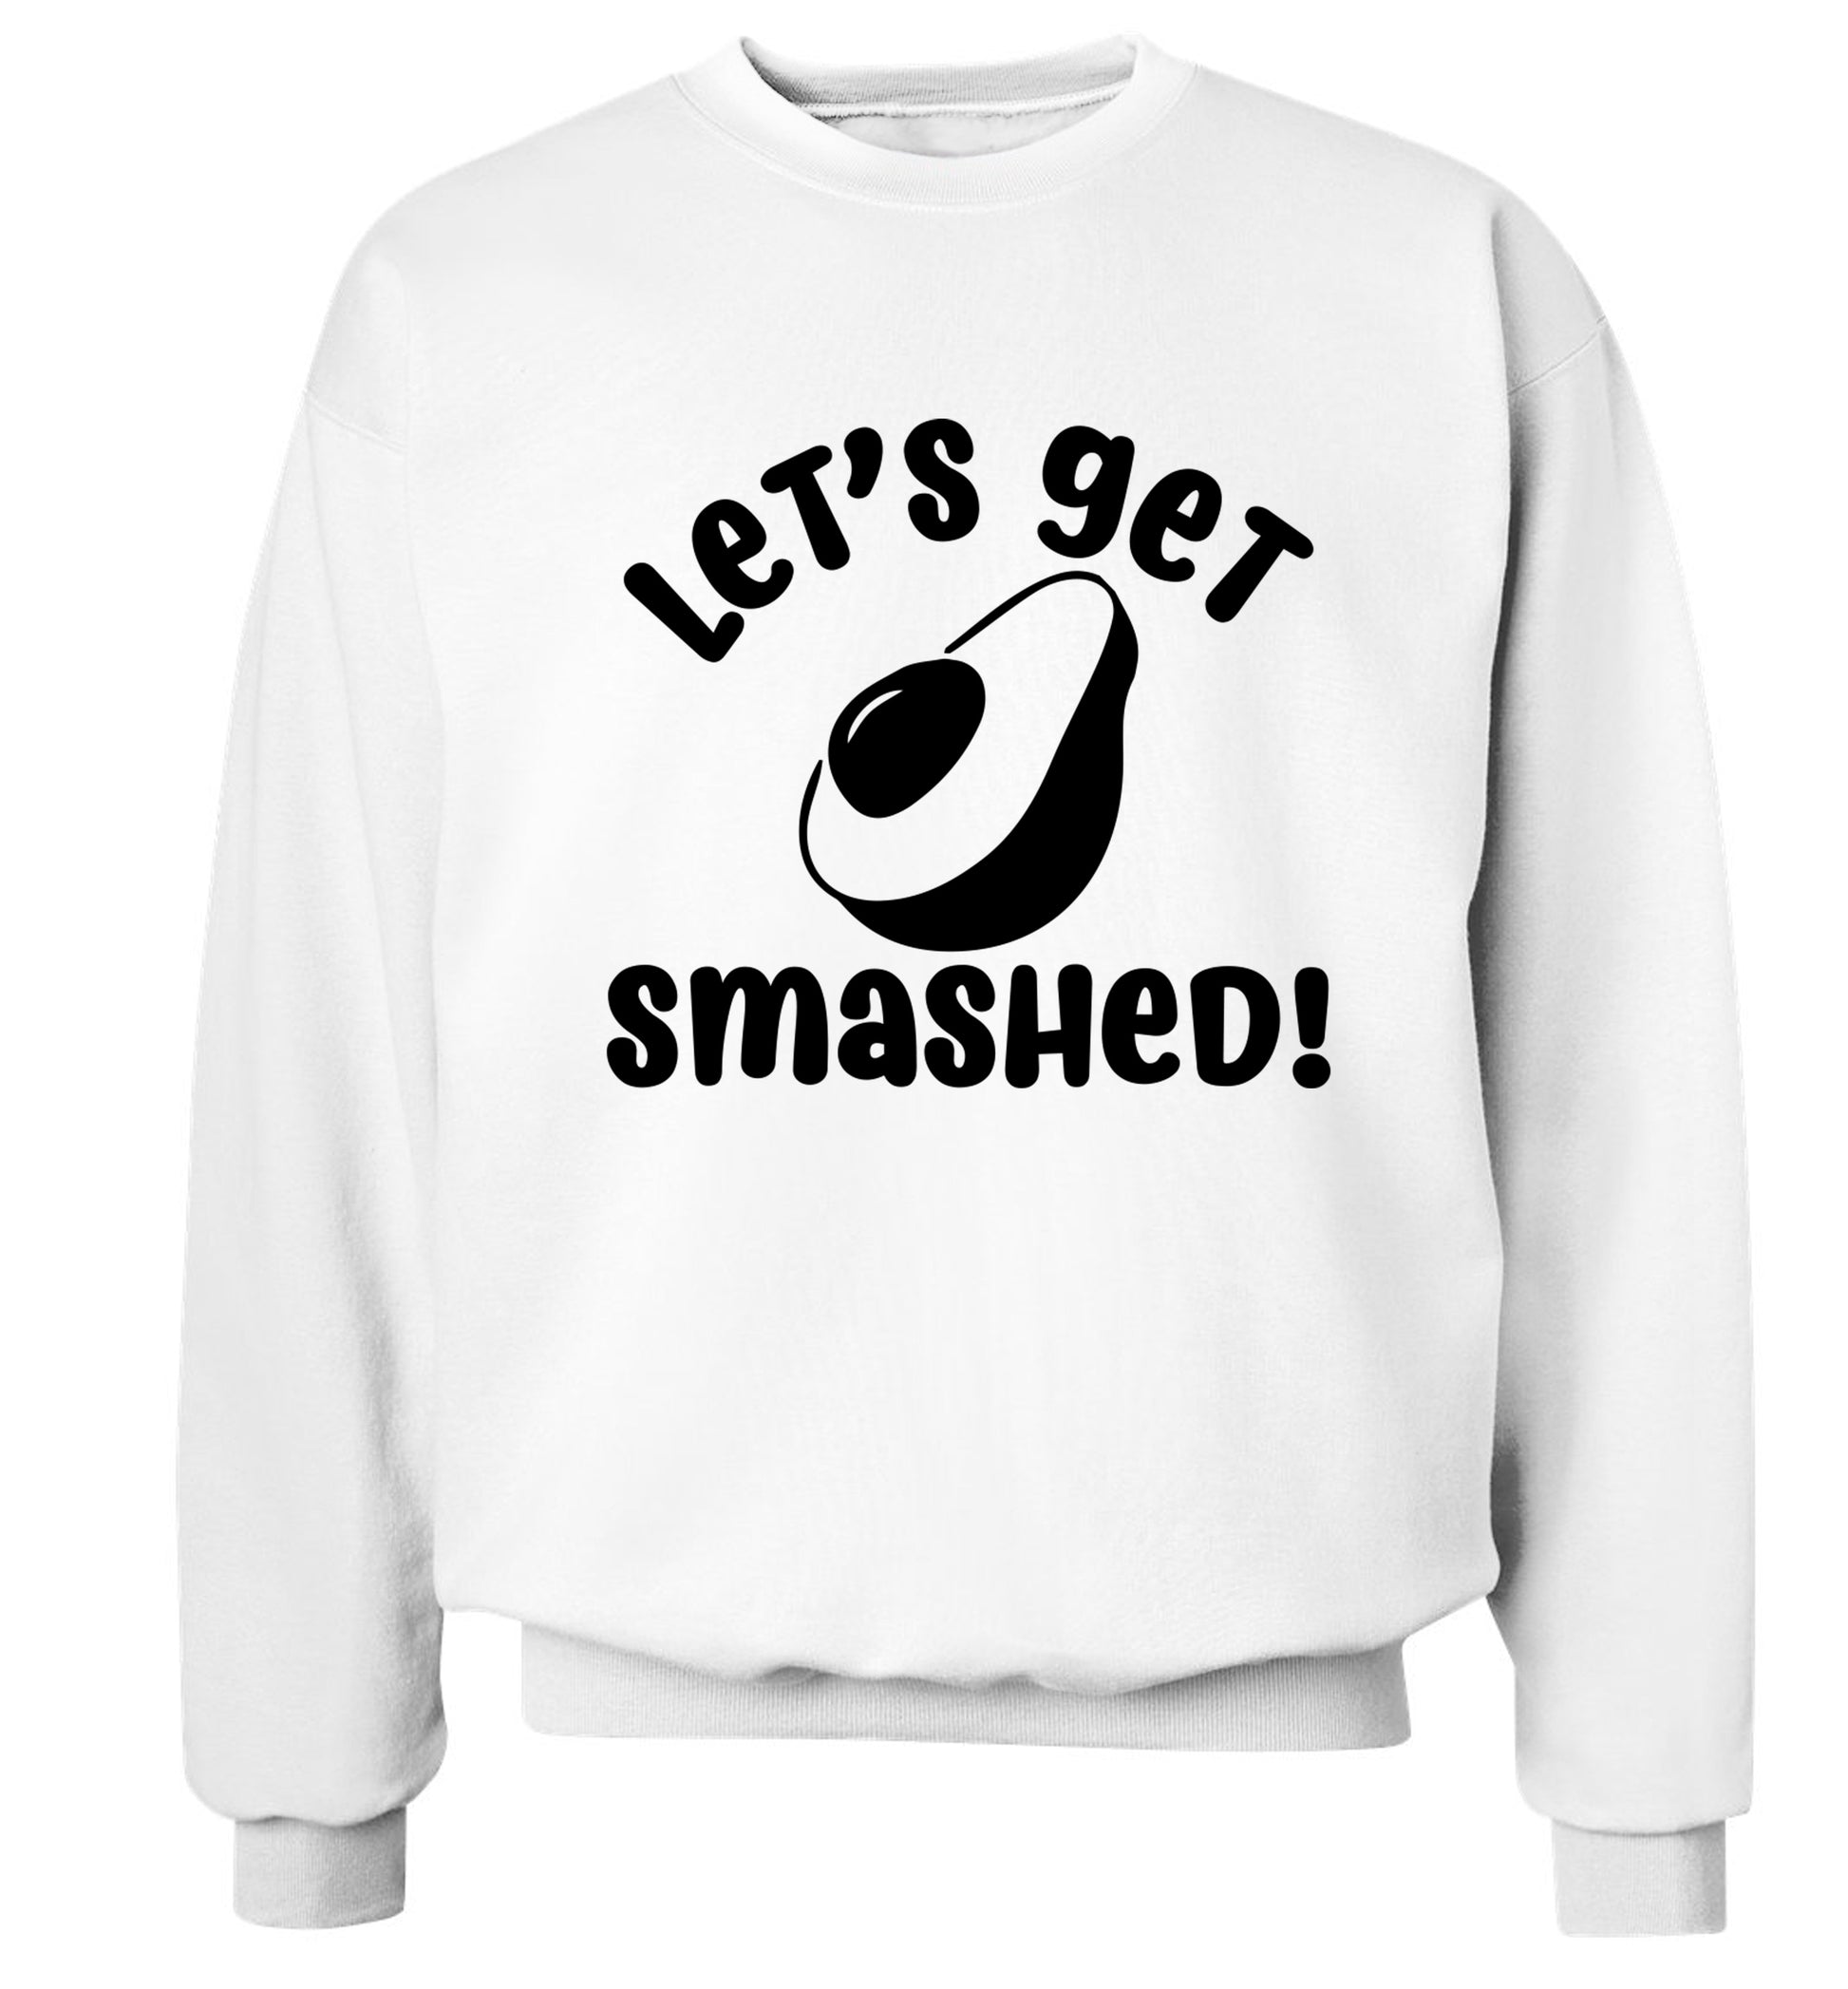 Let's get smashed Adult's unisex white Sweater 2XL